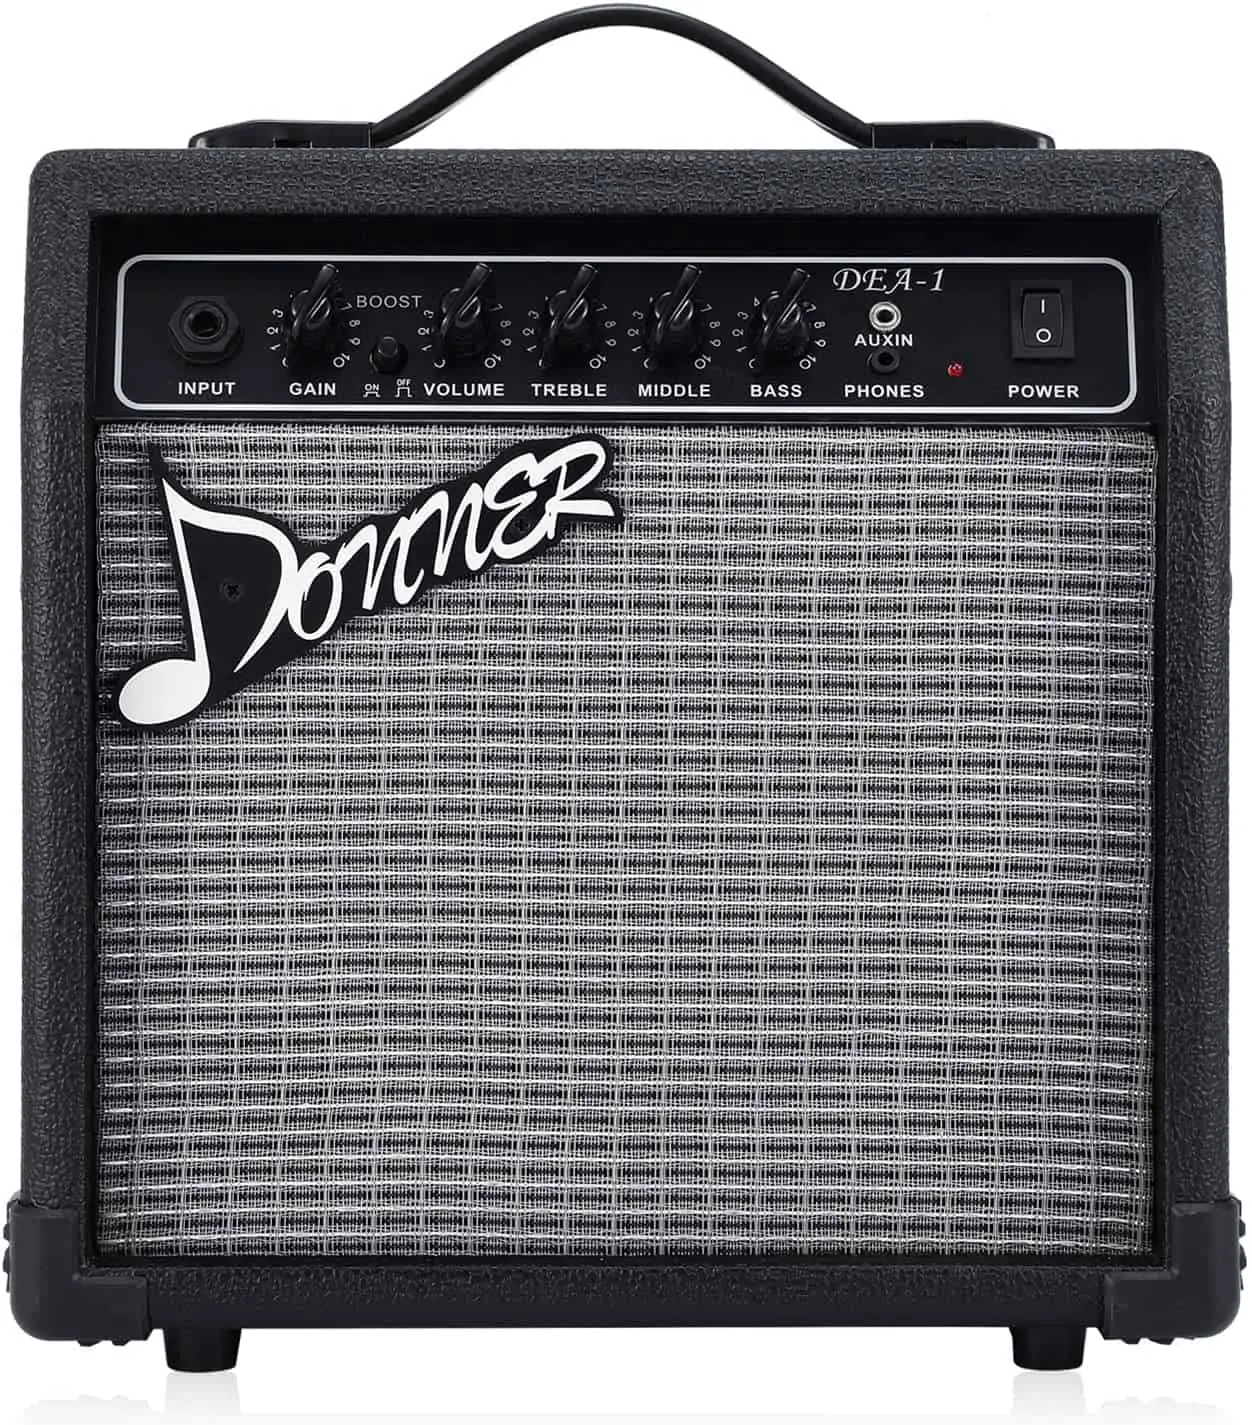 best electric guitar amp for beginners